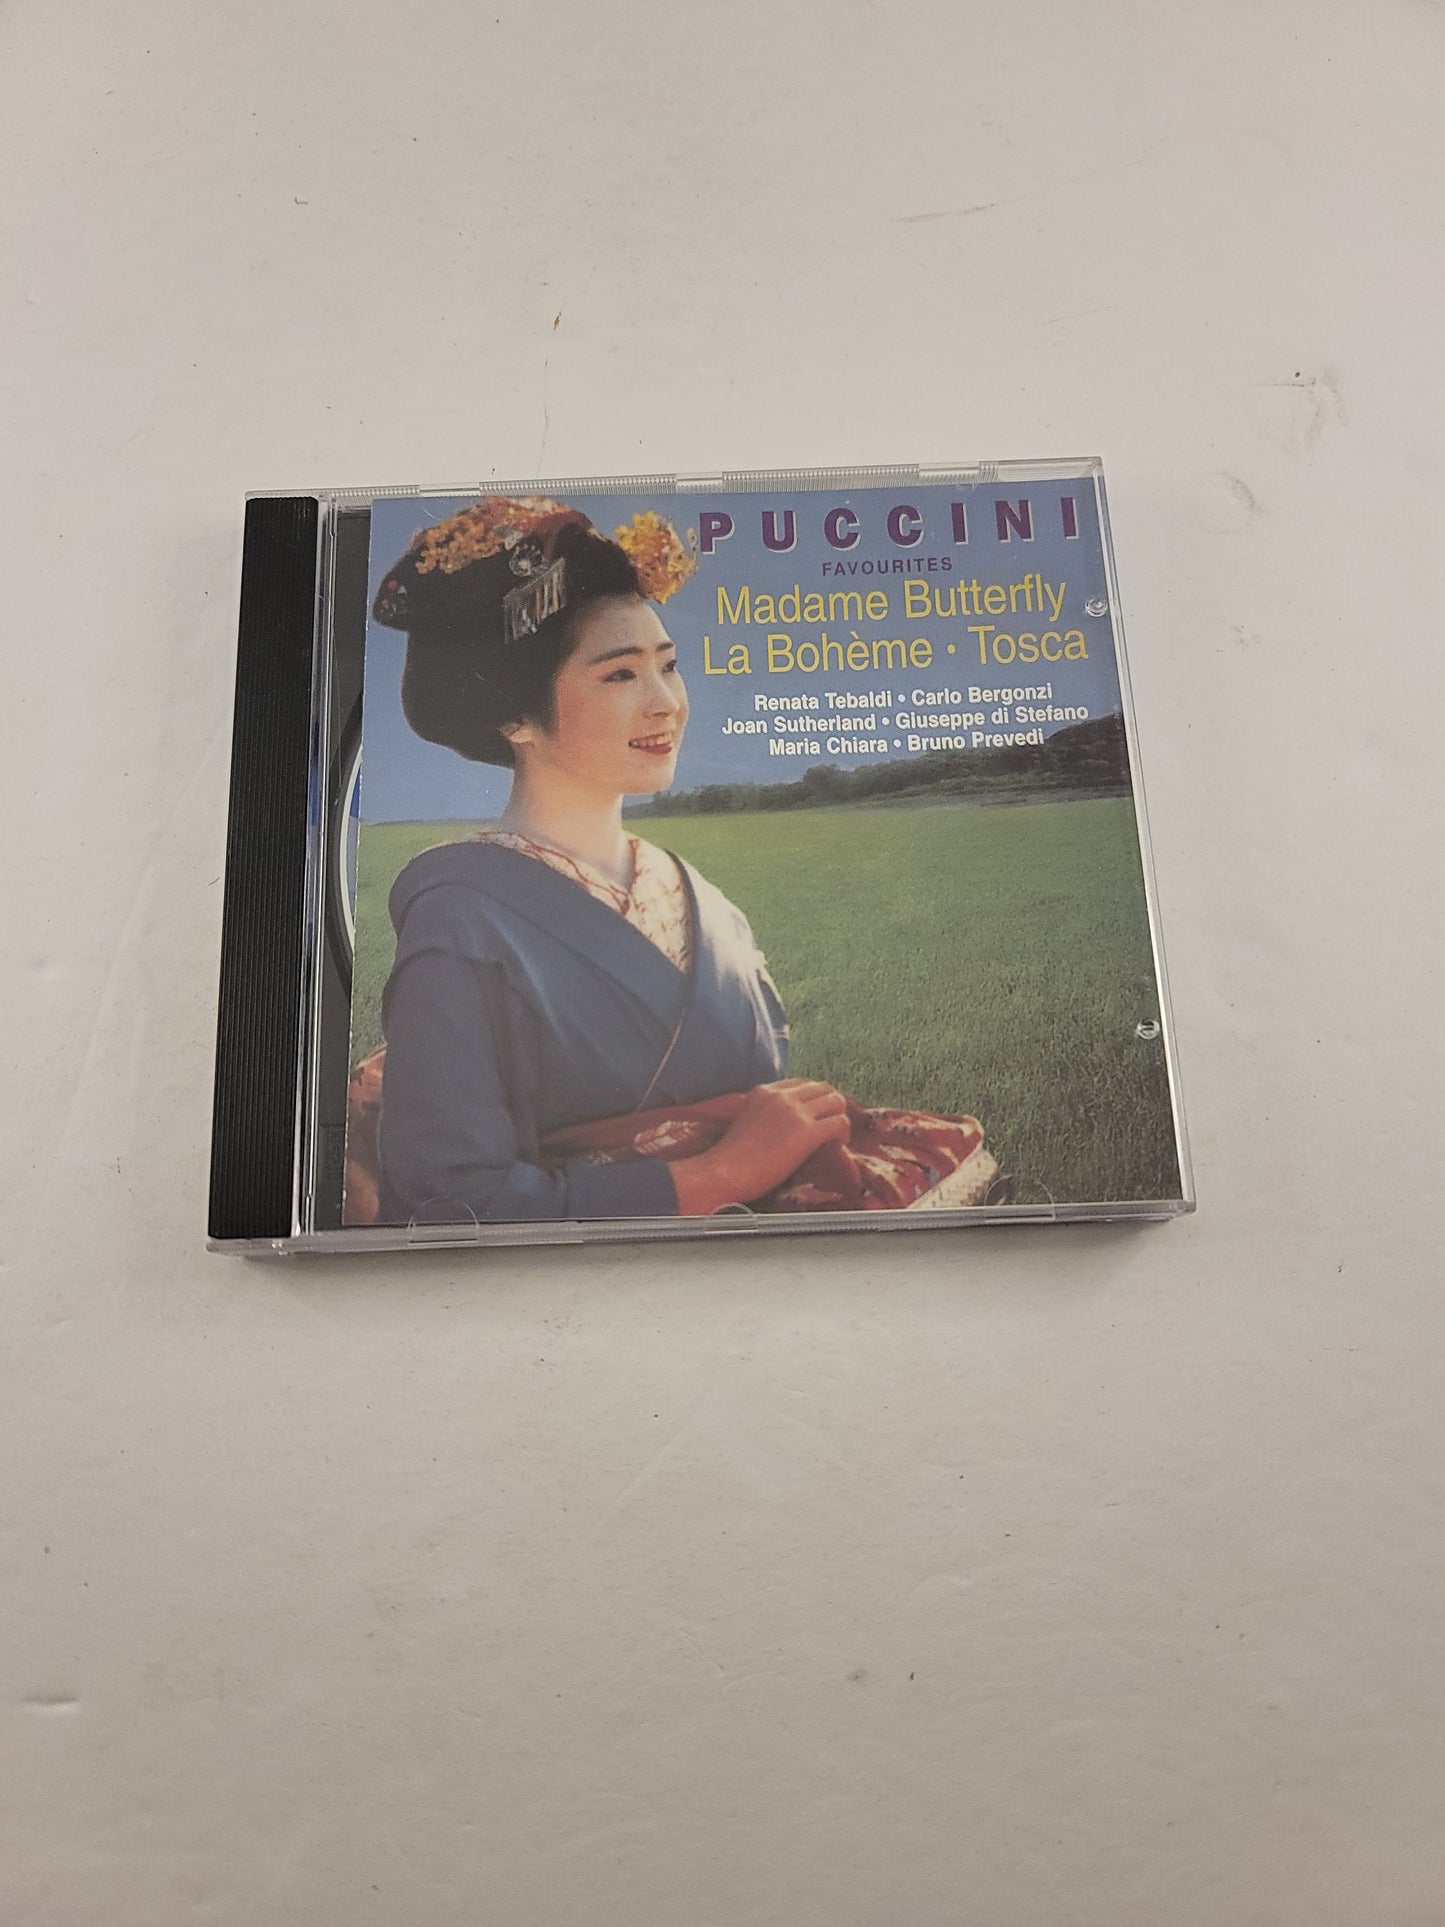 Puccini Favourites Madame Butterfly - CD